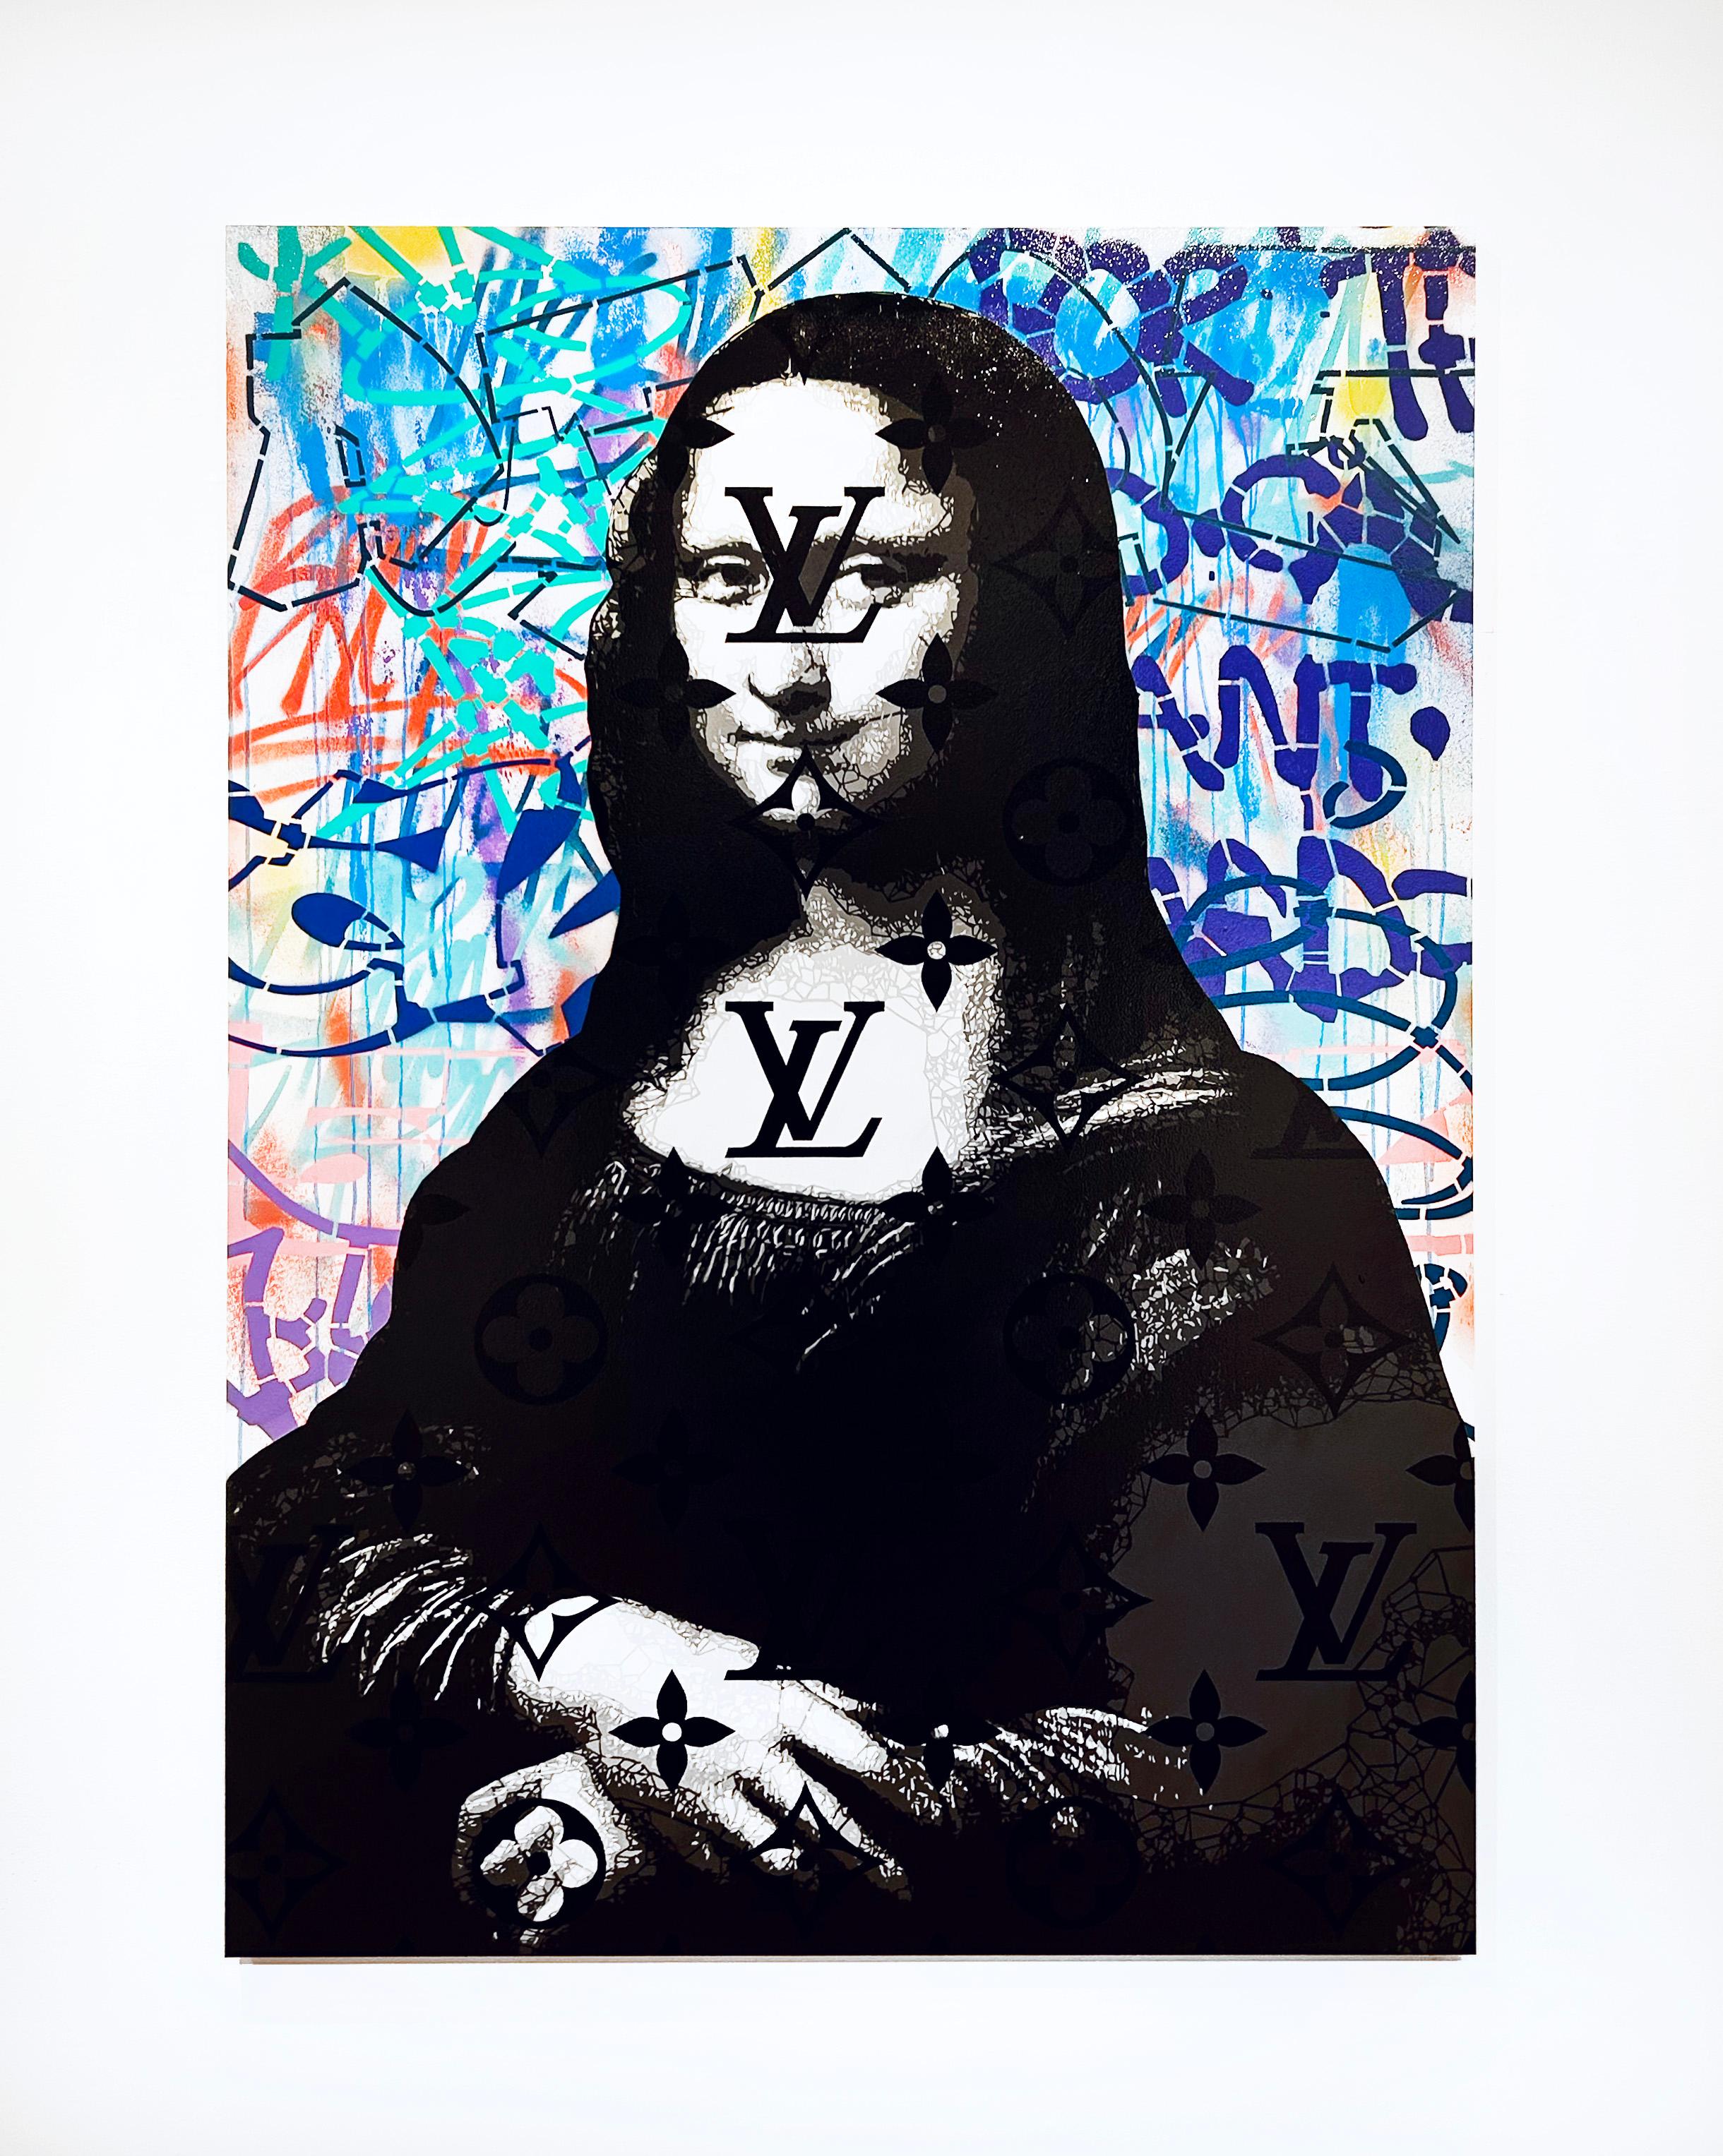 LV Mona Lisa - Feels - Contemporary Painting by Campbell la Pun